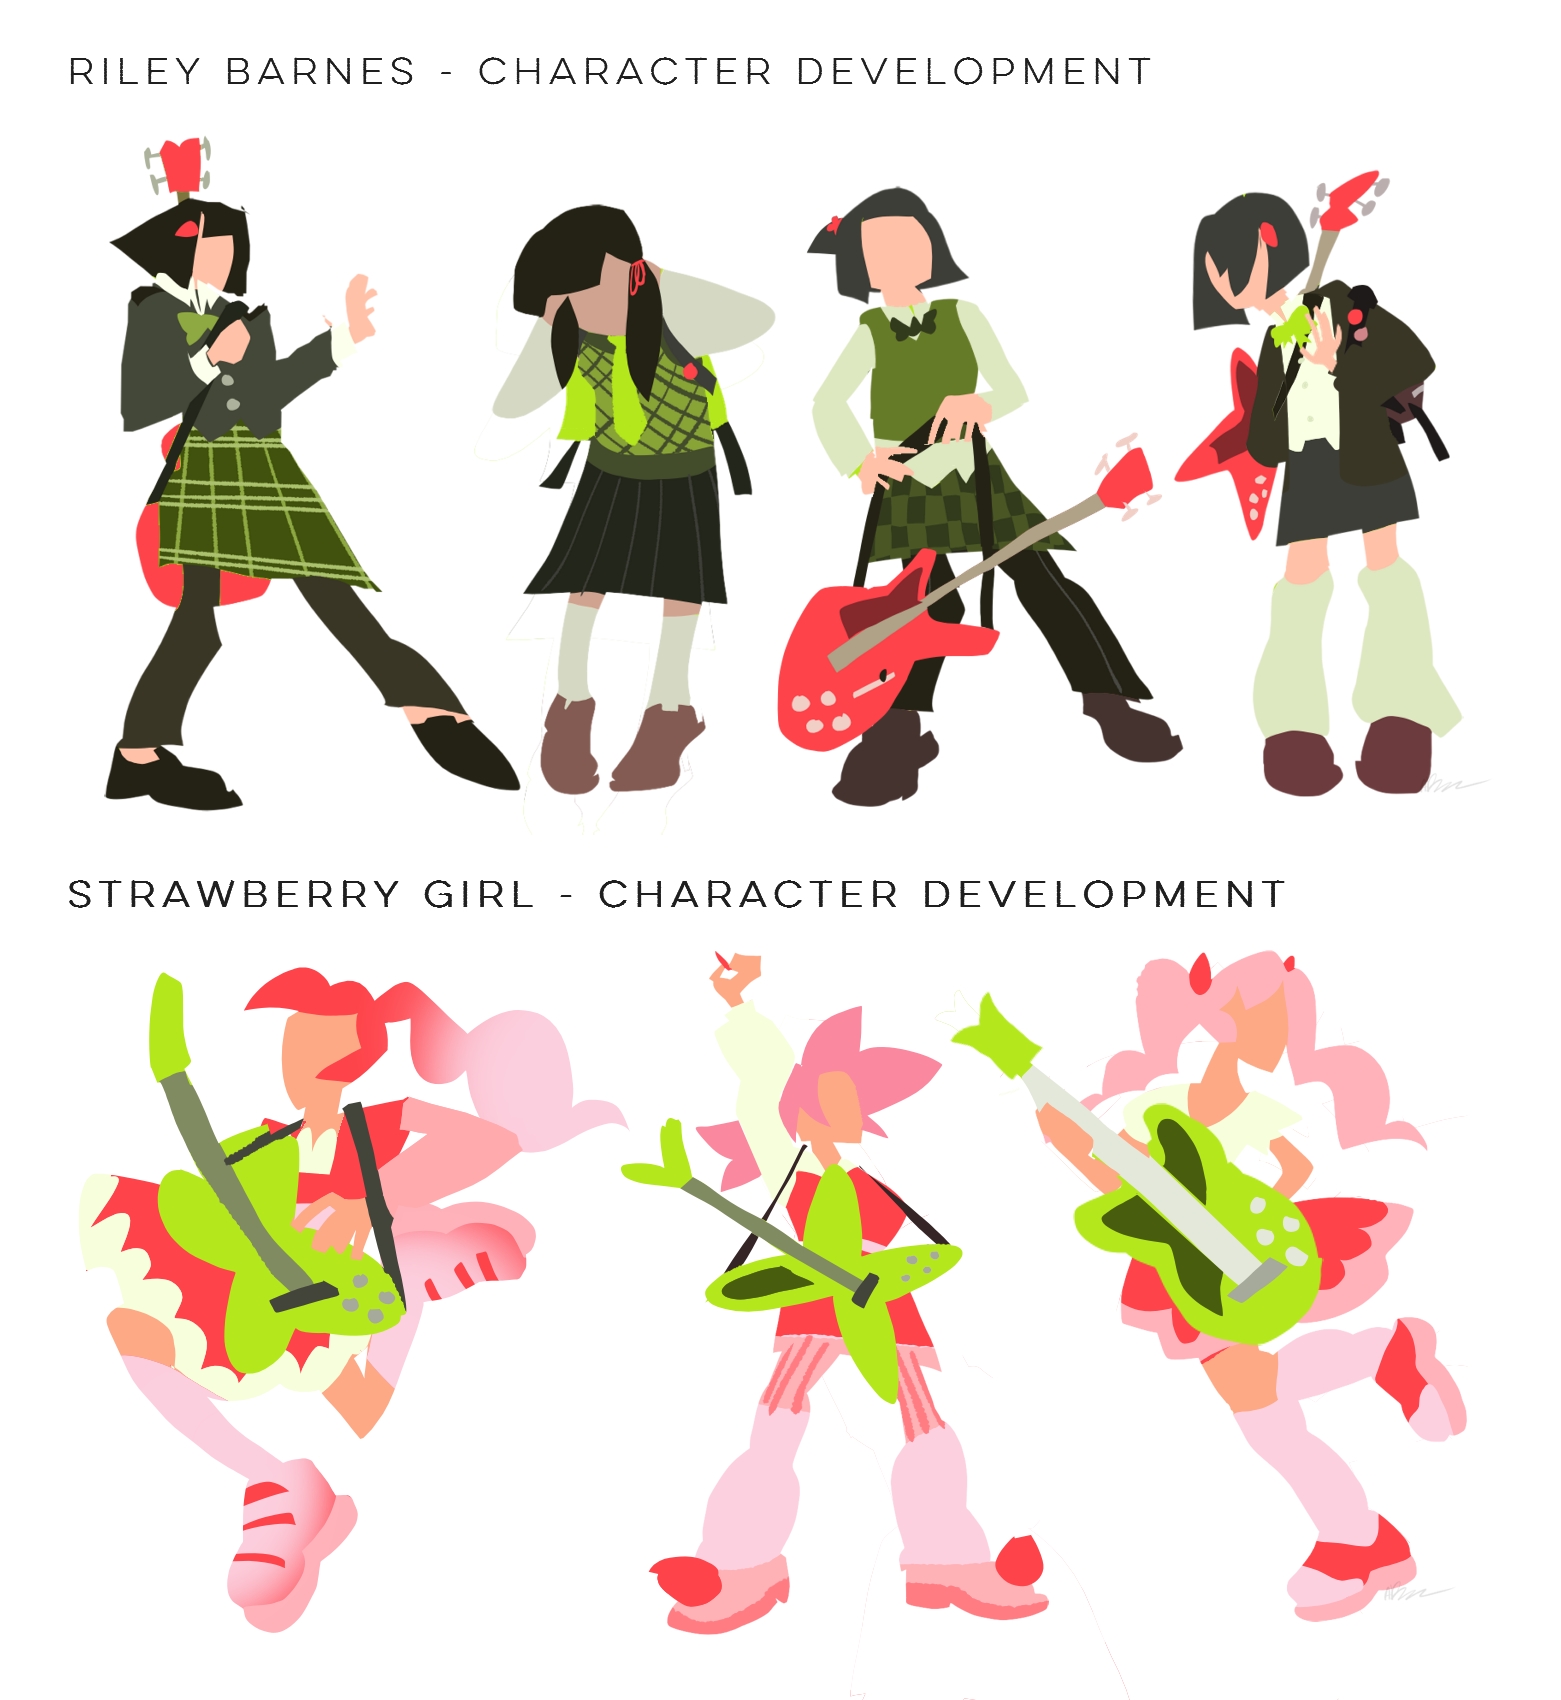 Initial character developemnt for Riley Barnes and Strawberrty Girl.